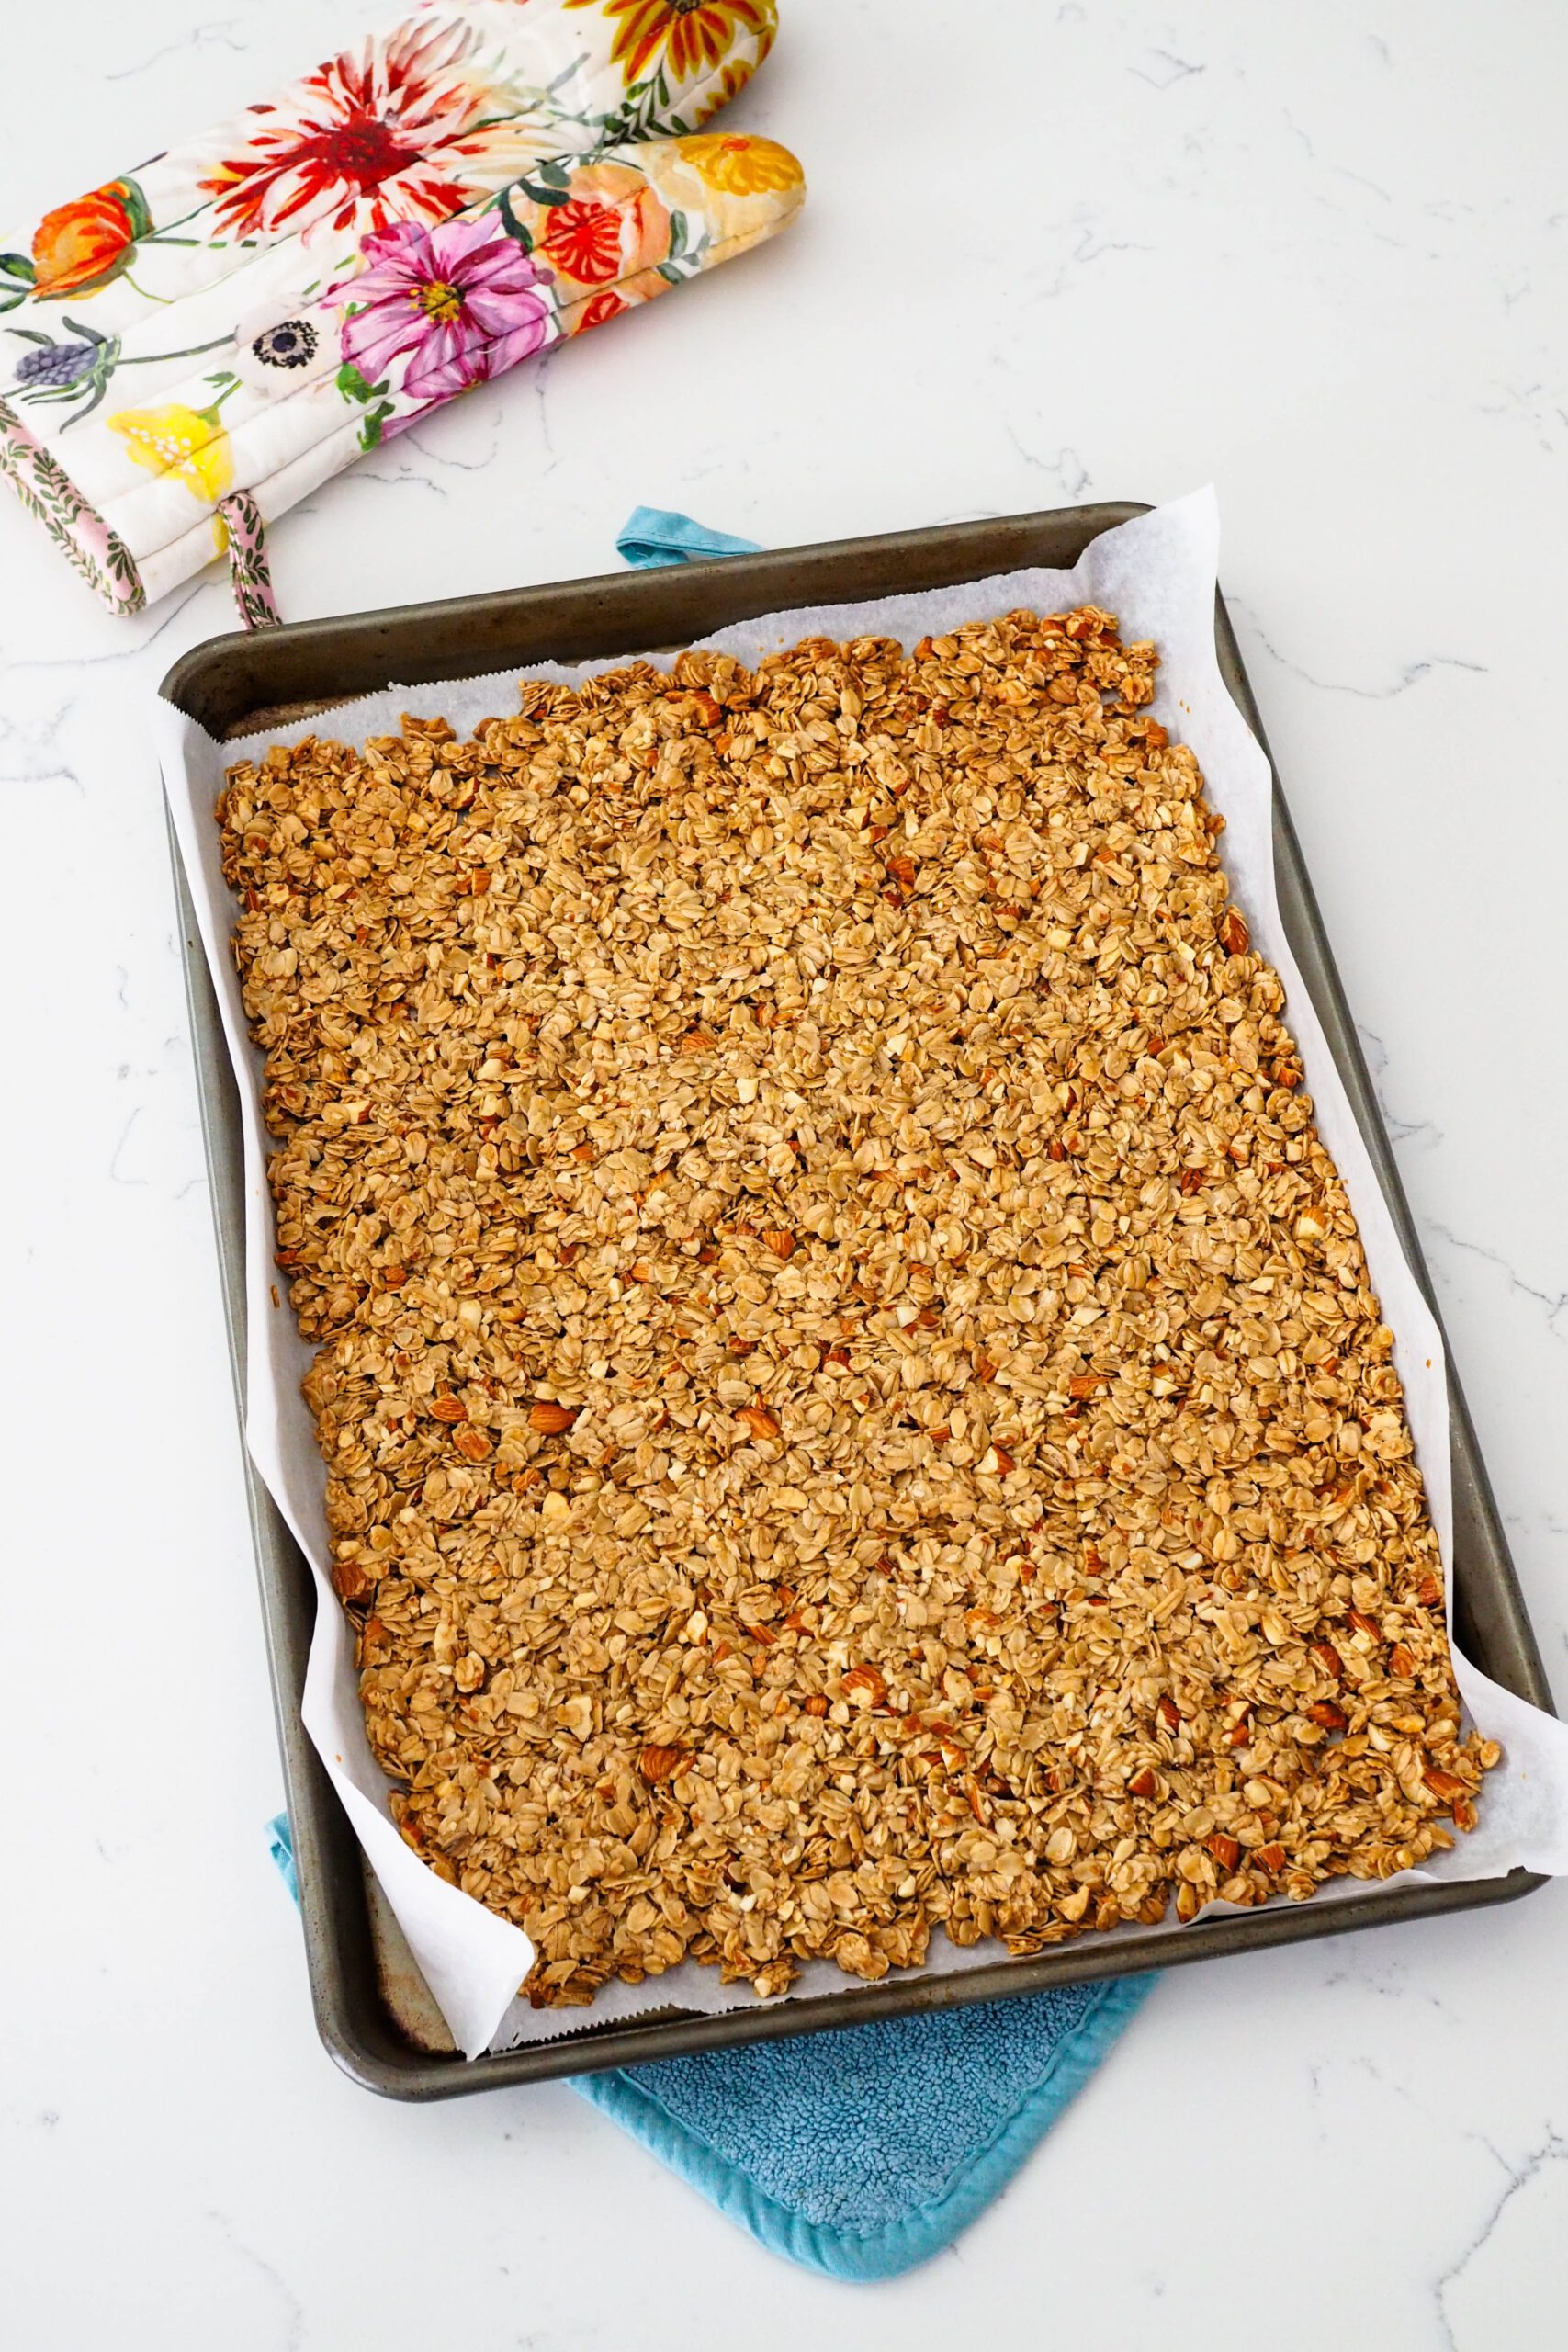 A thin layer of baked granola on a baking sheet.